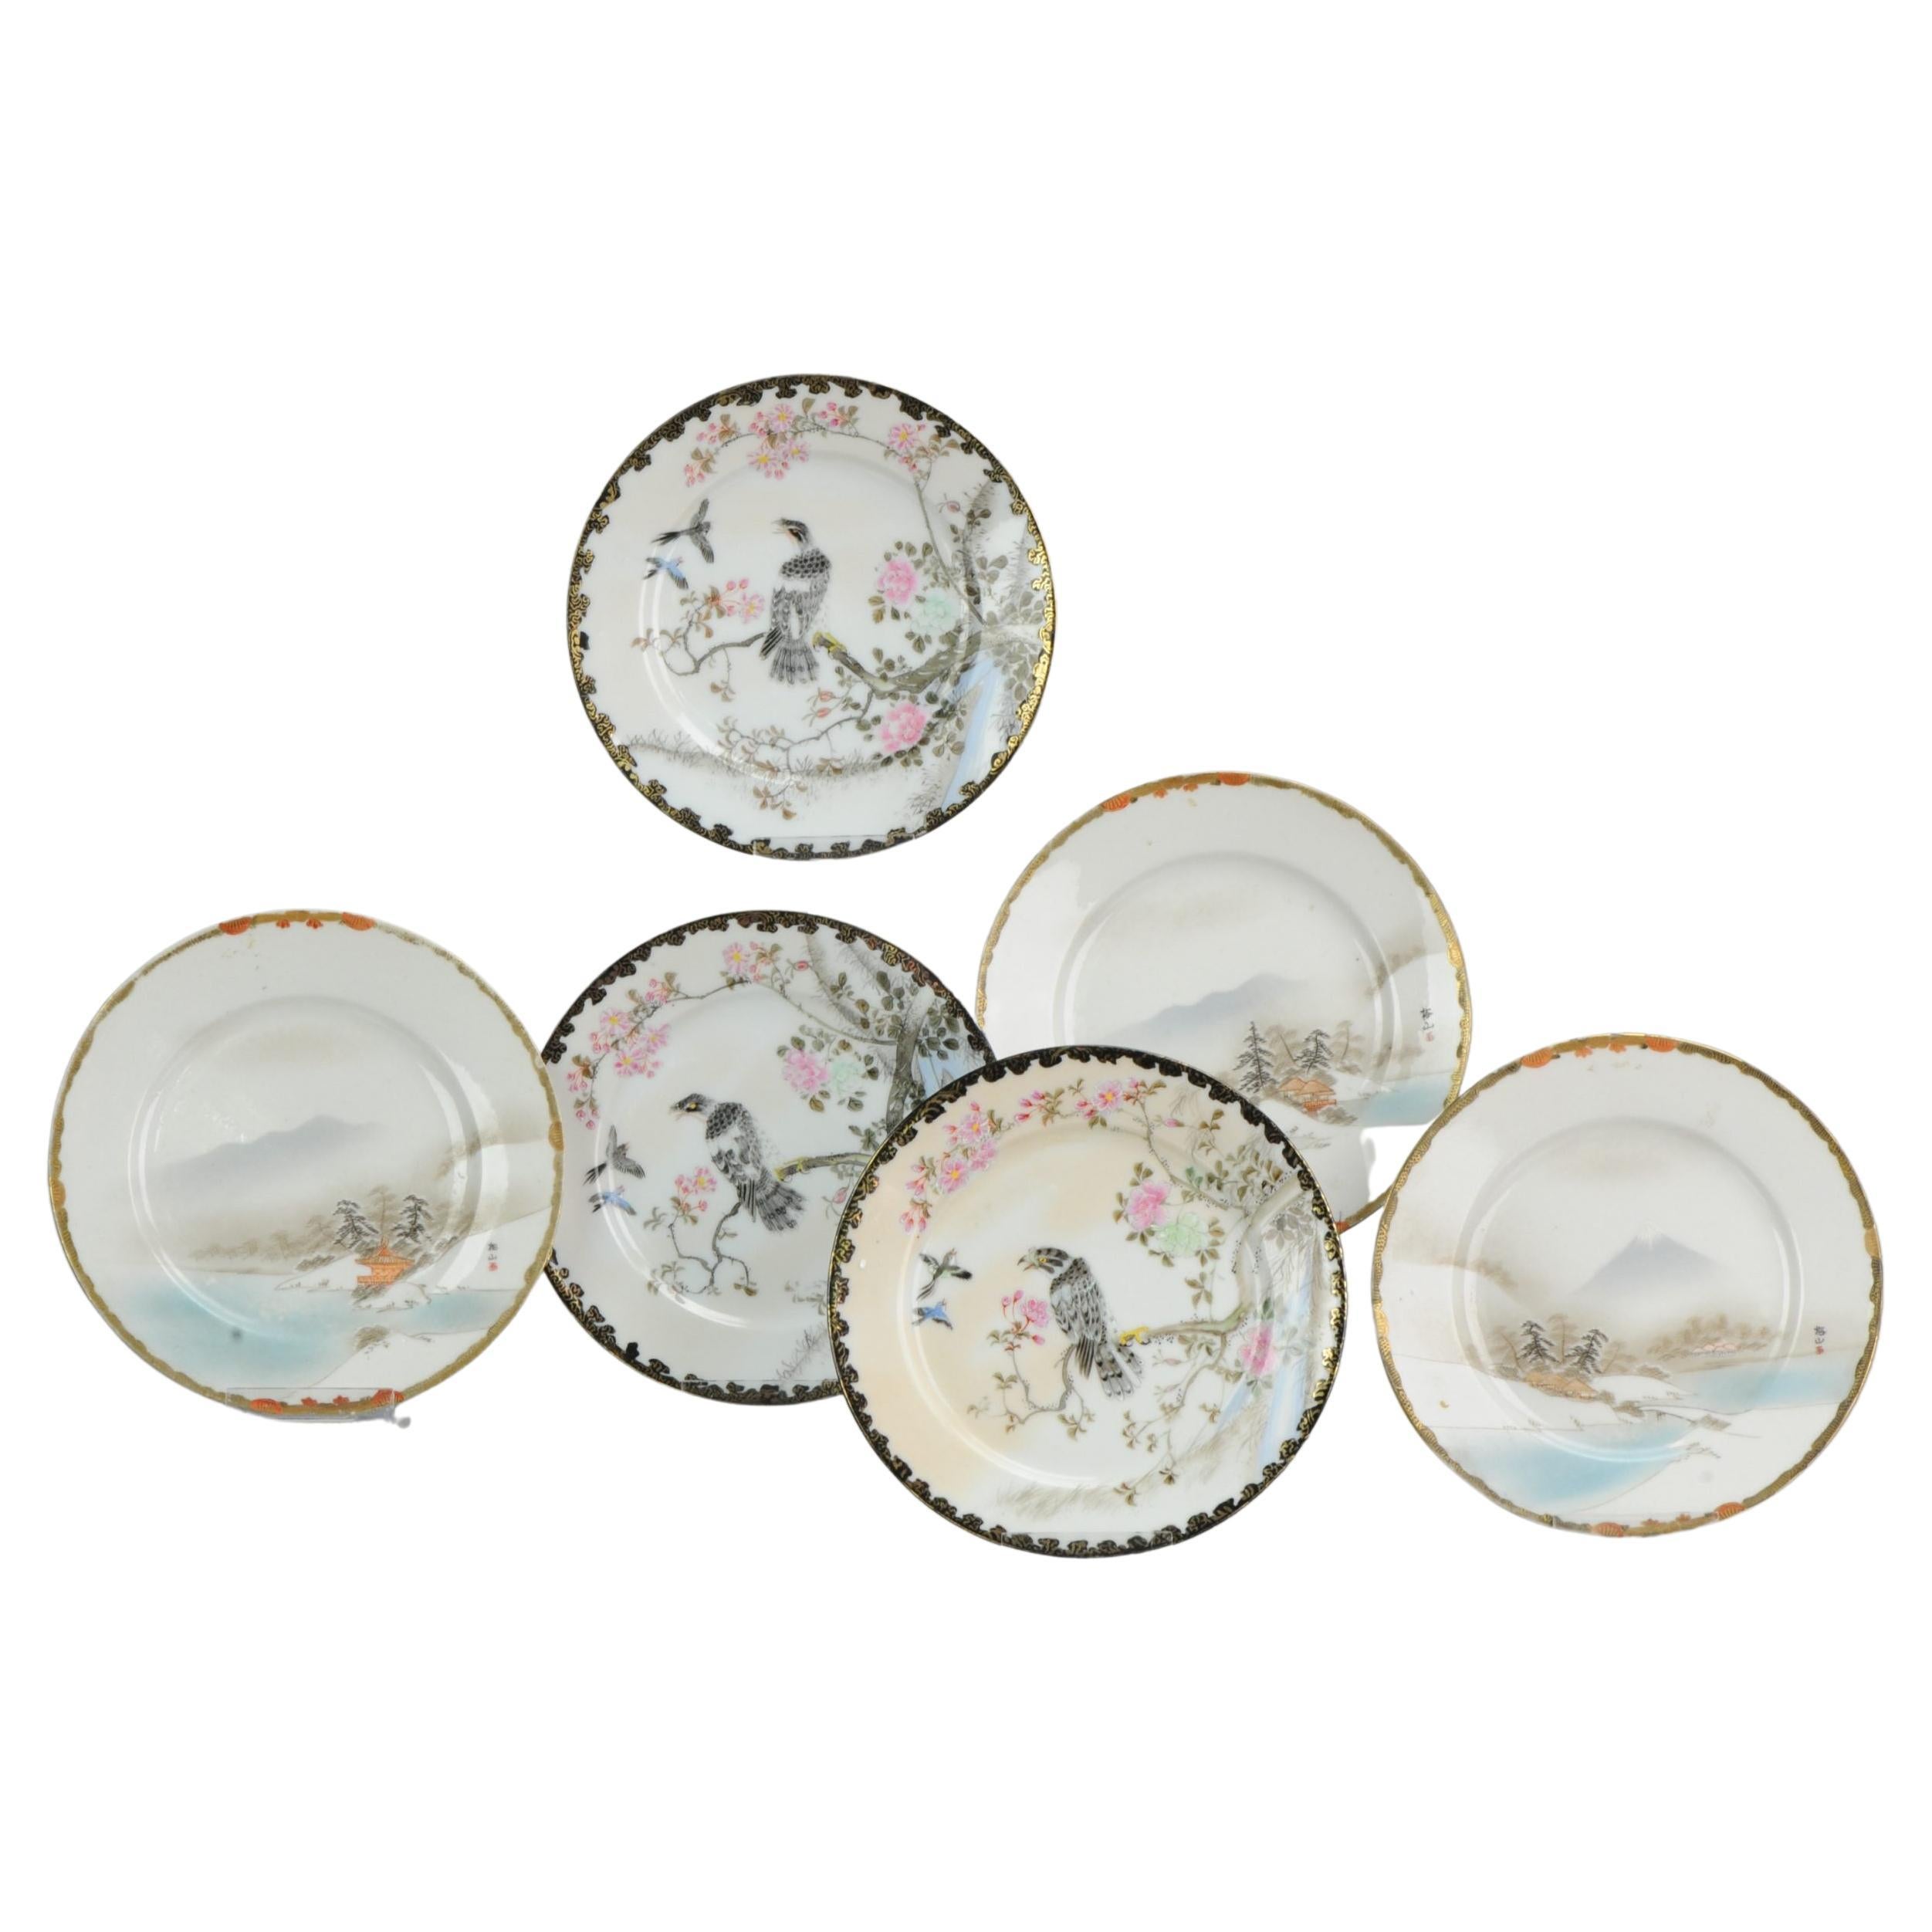 Set of 6 Pieces Japanese Porcelain Plates Hand Painted Taisho Period, 1920-1940